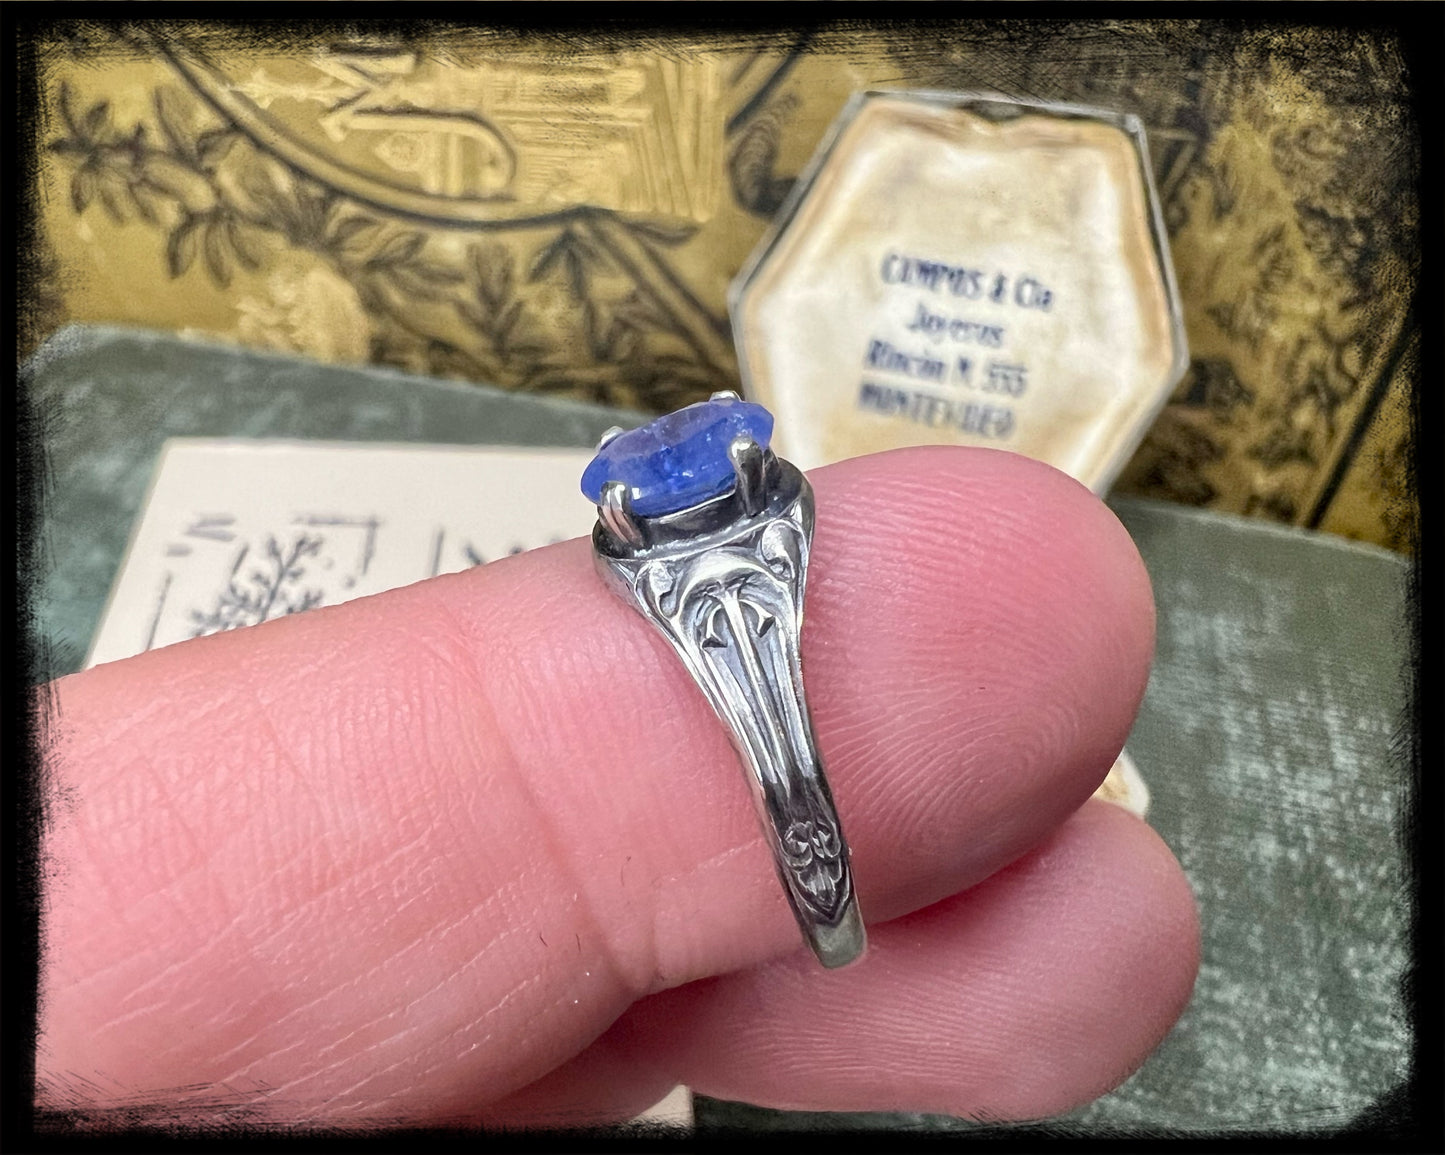 Art Deco Style Sterling Silver with Tanzanite Setting-Size 7.25-Artisan Handmade Jewelry